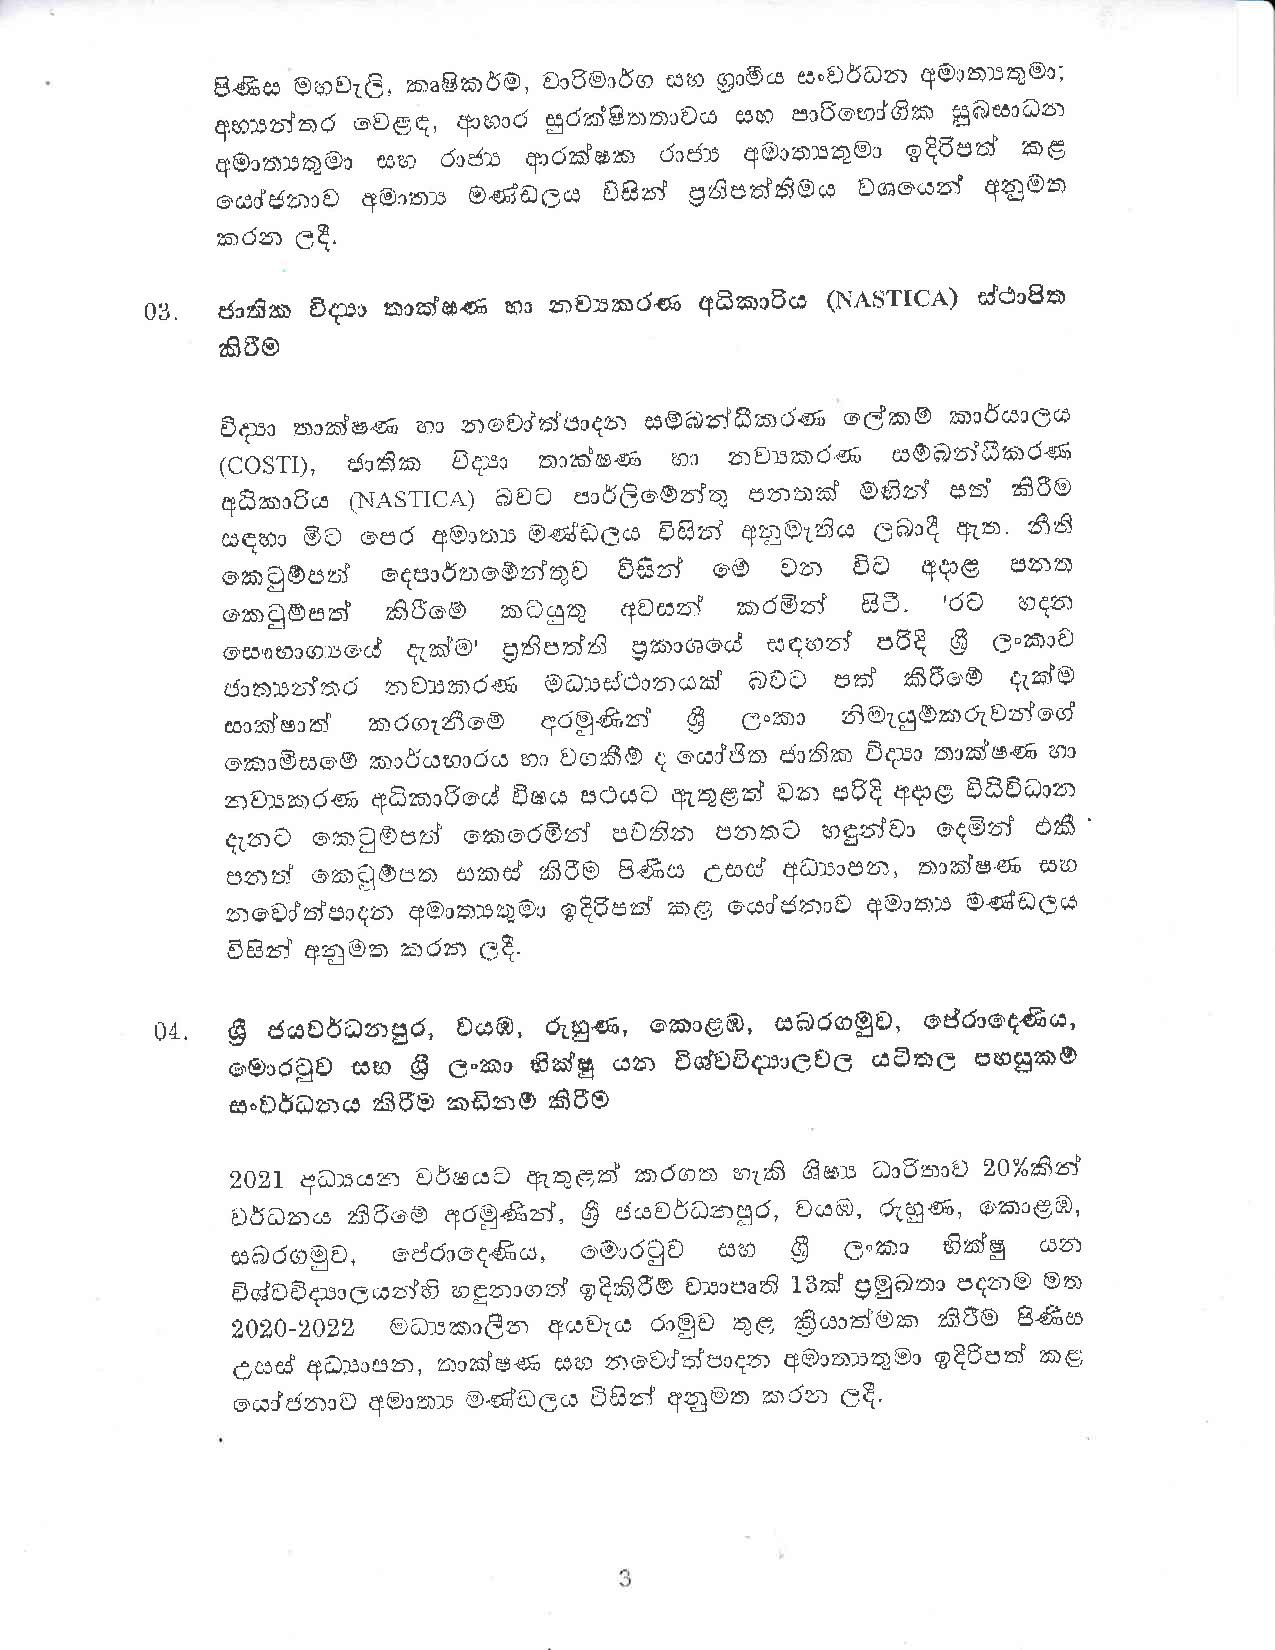 Cabinet Decision on 22.01.2020Full document page 003